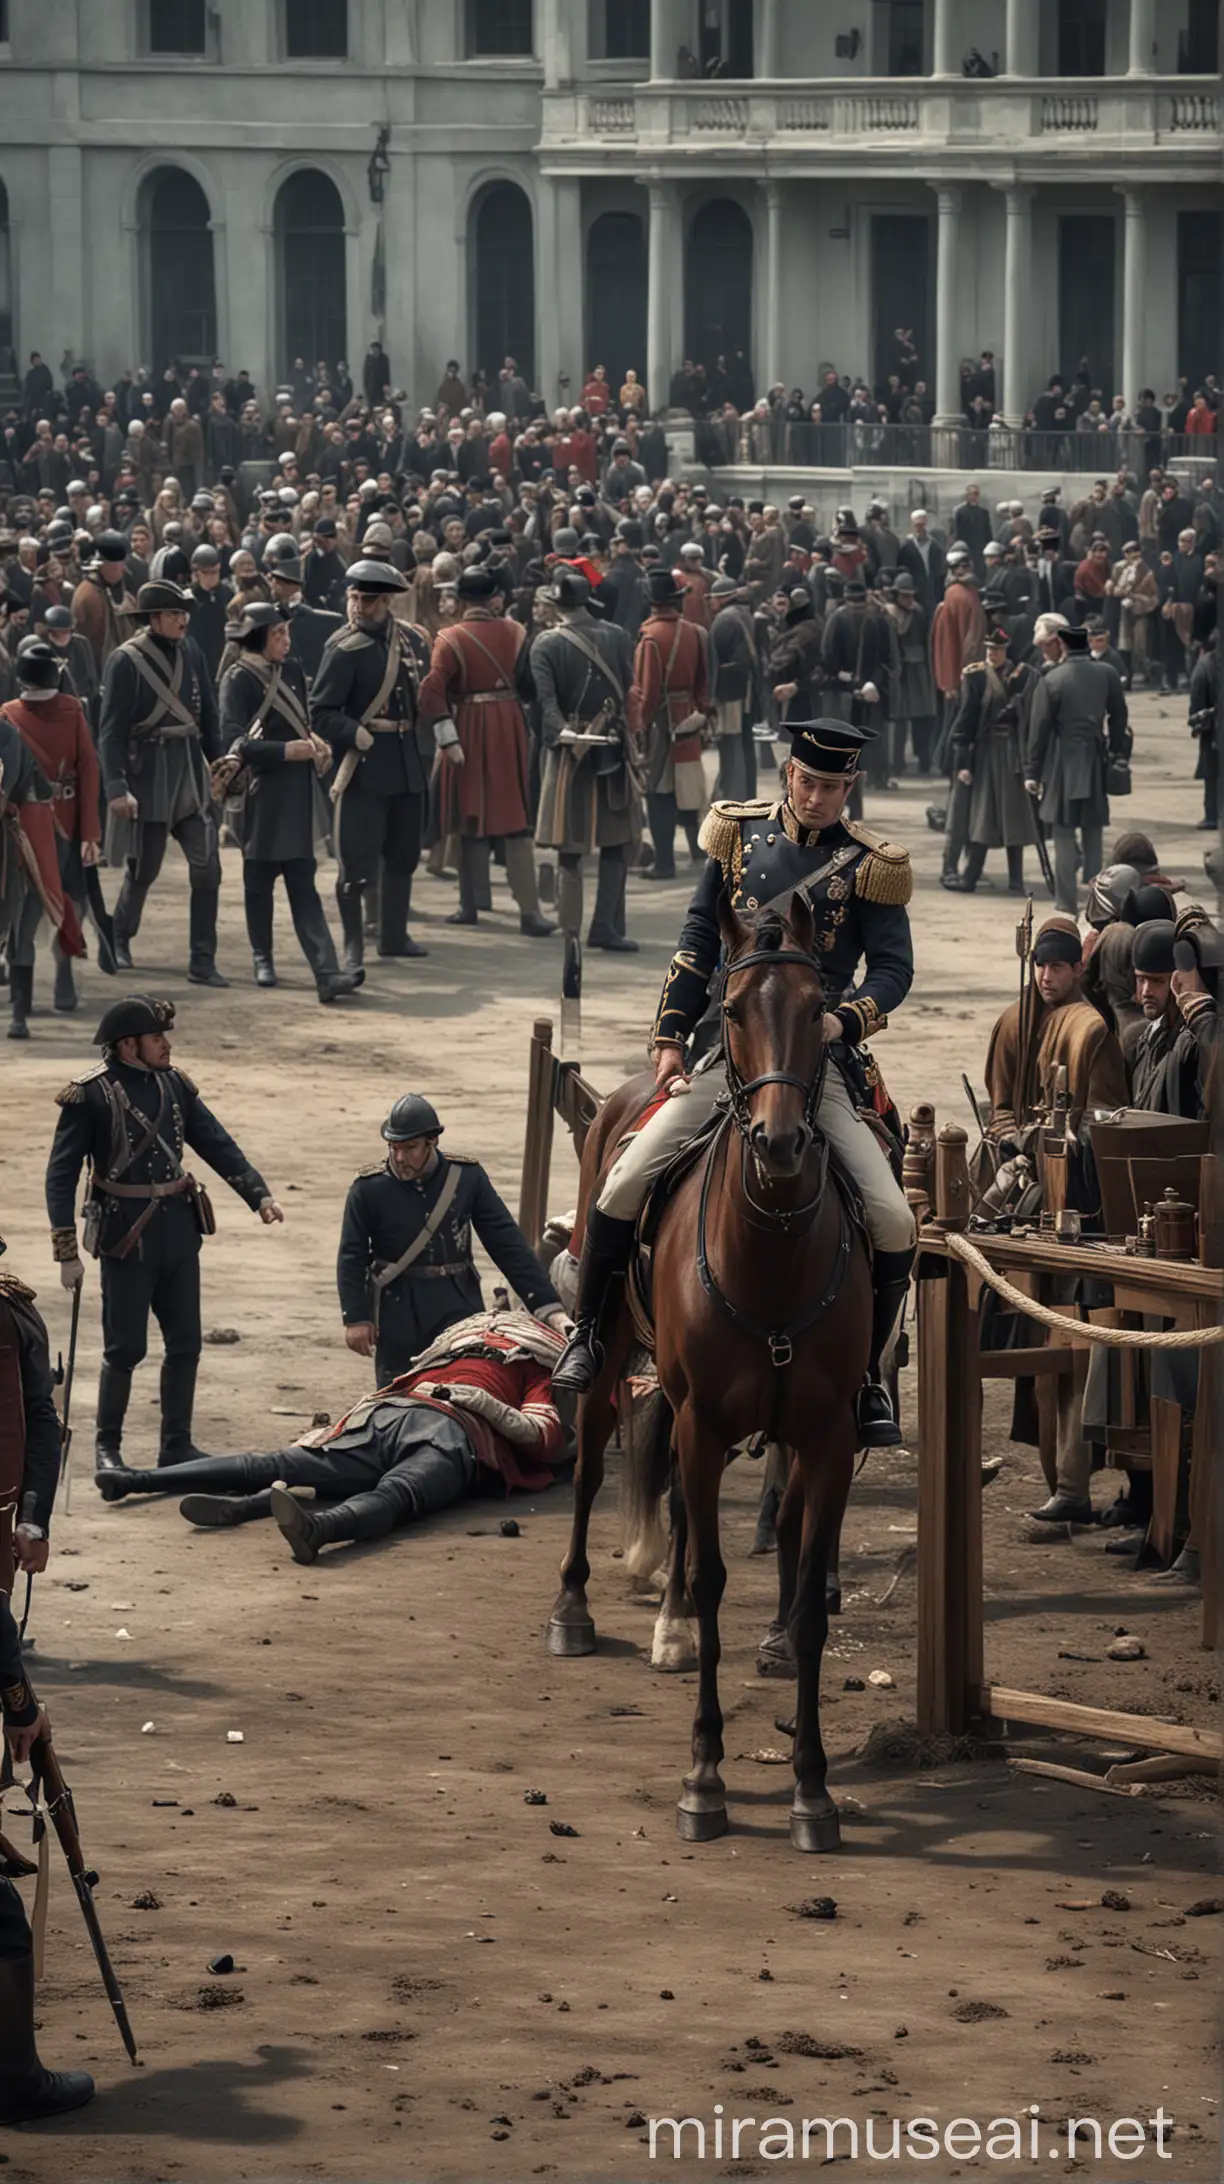 The dramatic moment of King Philip’s assassination during a public event. hyper realistic